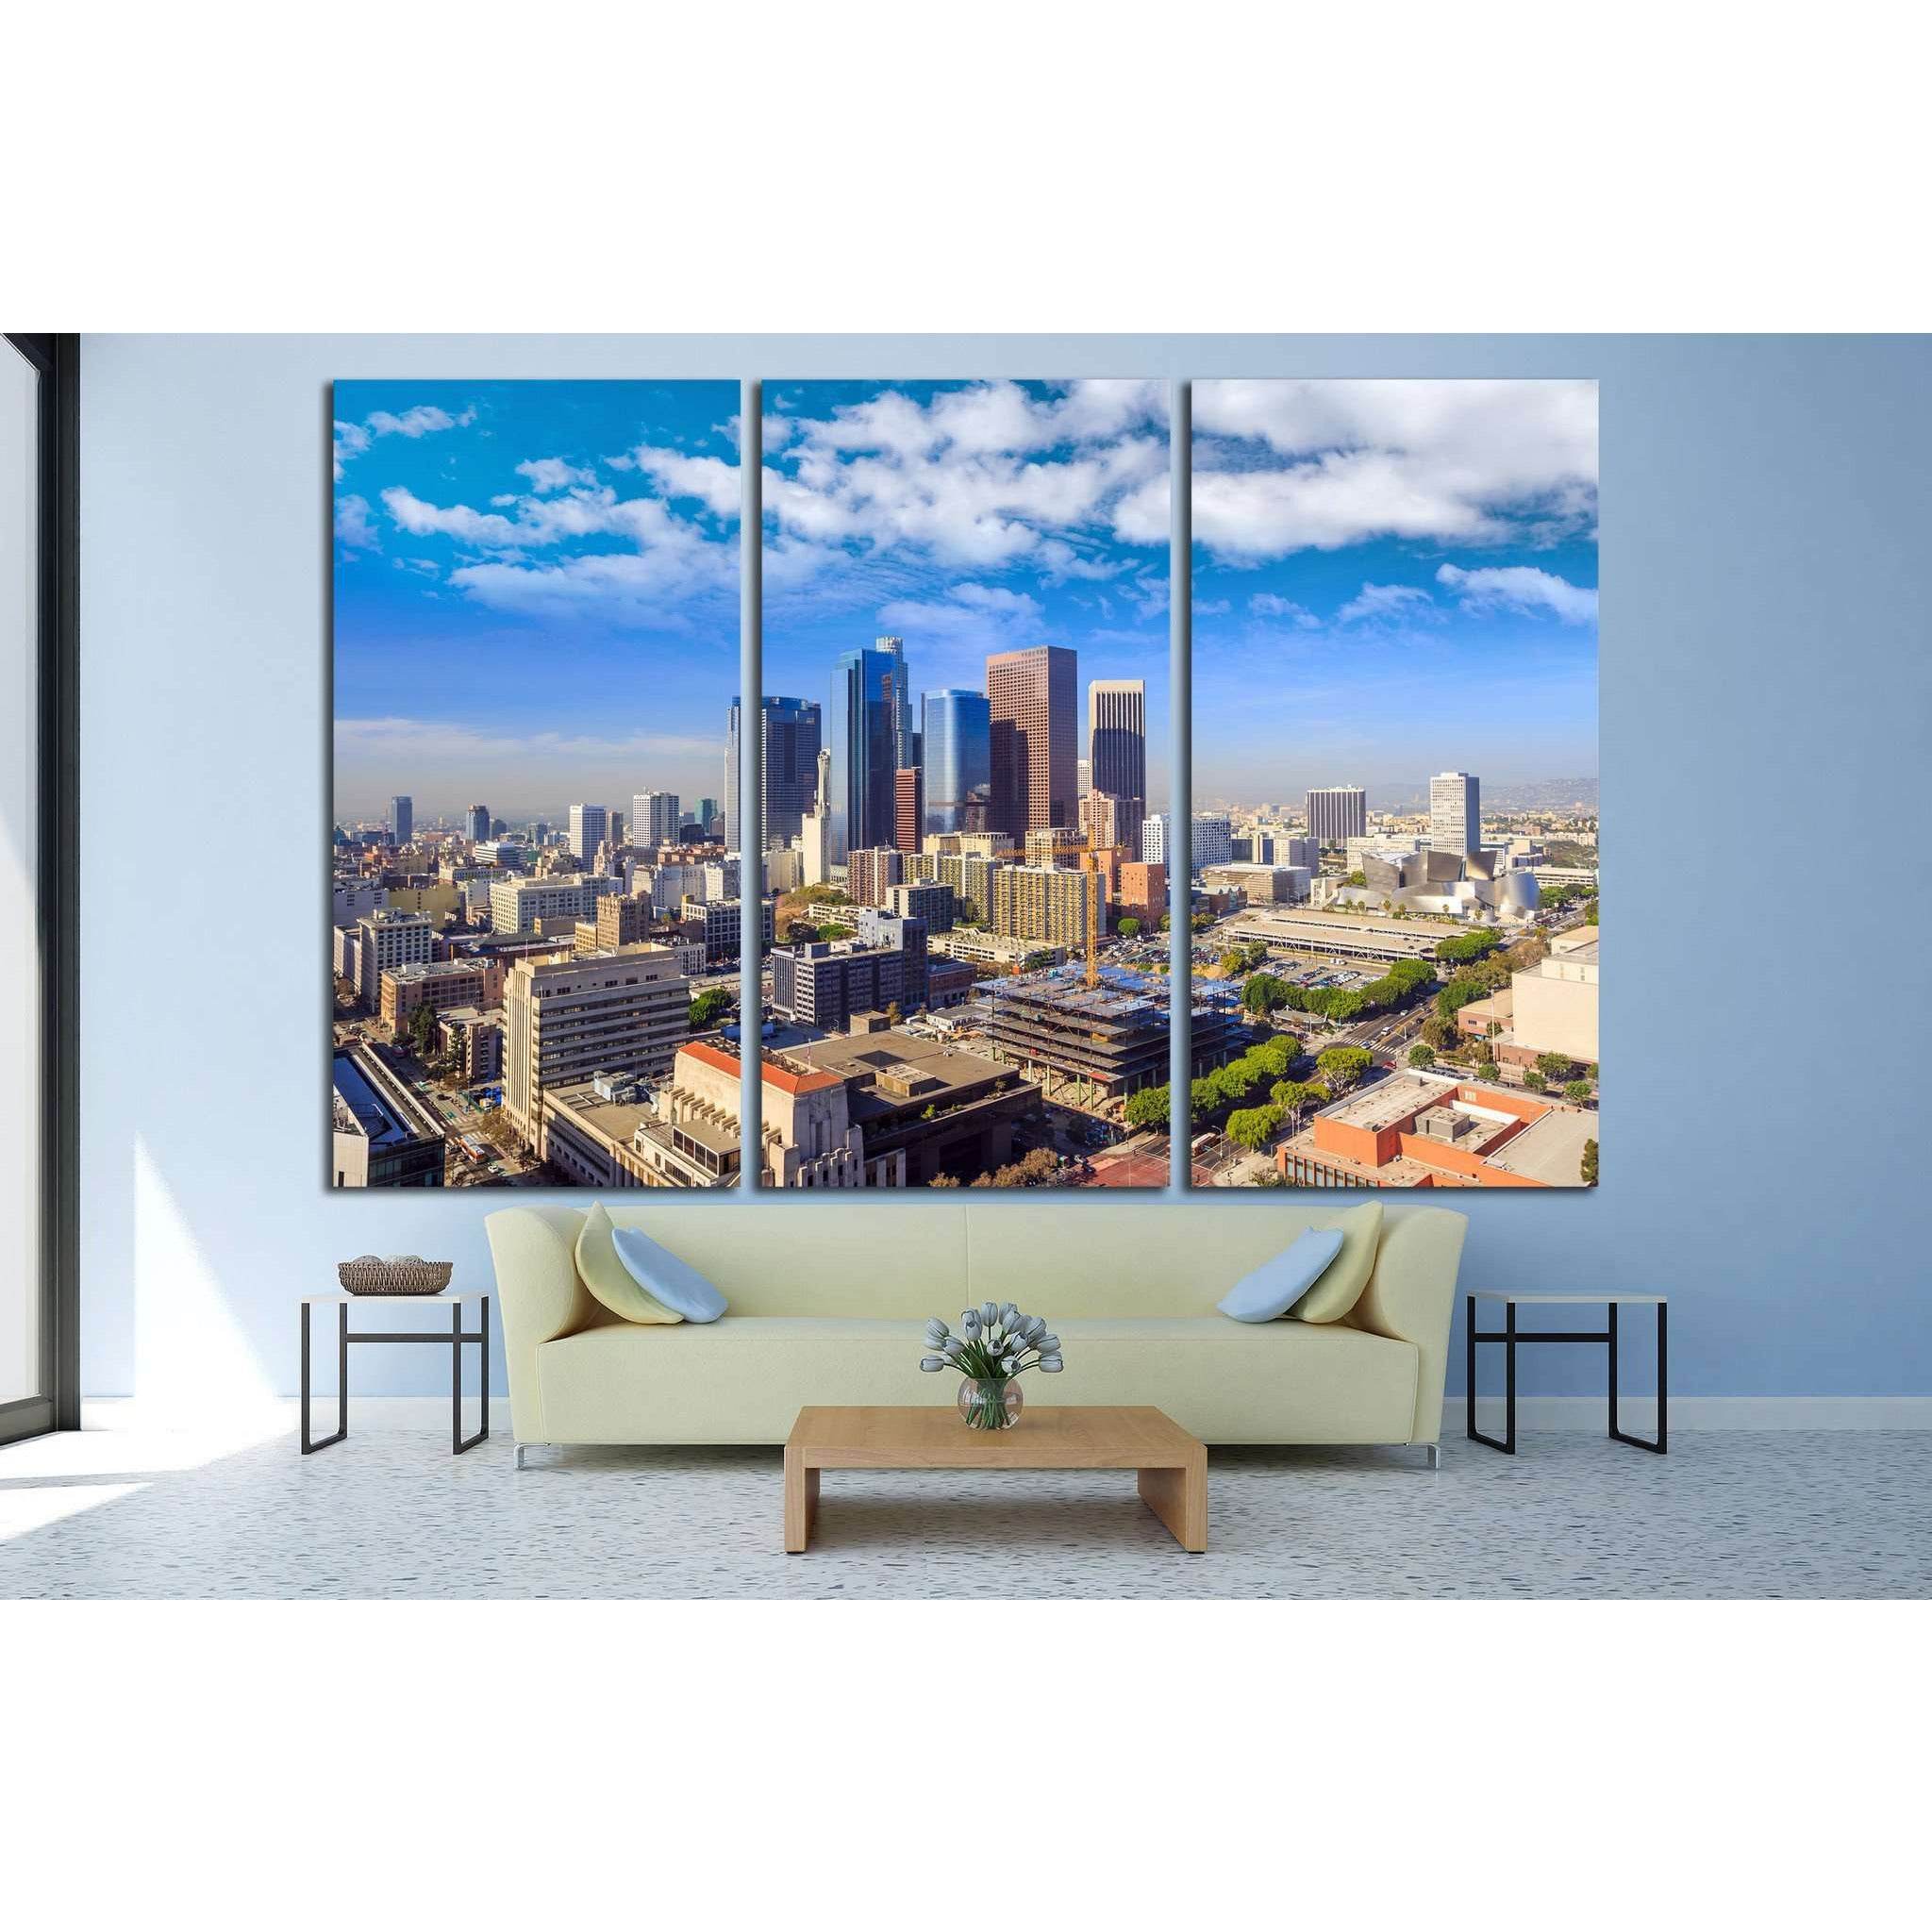 Downtown Los Angeles skyline, California №1223 Ready to Hang Canvas Print